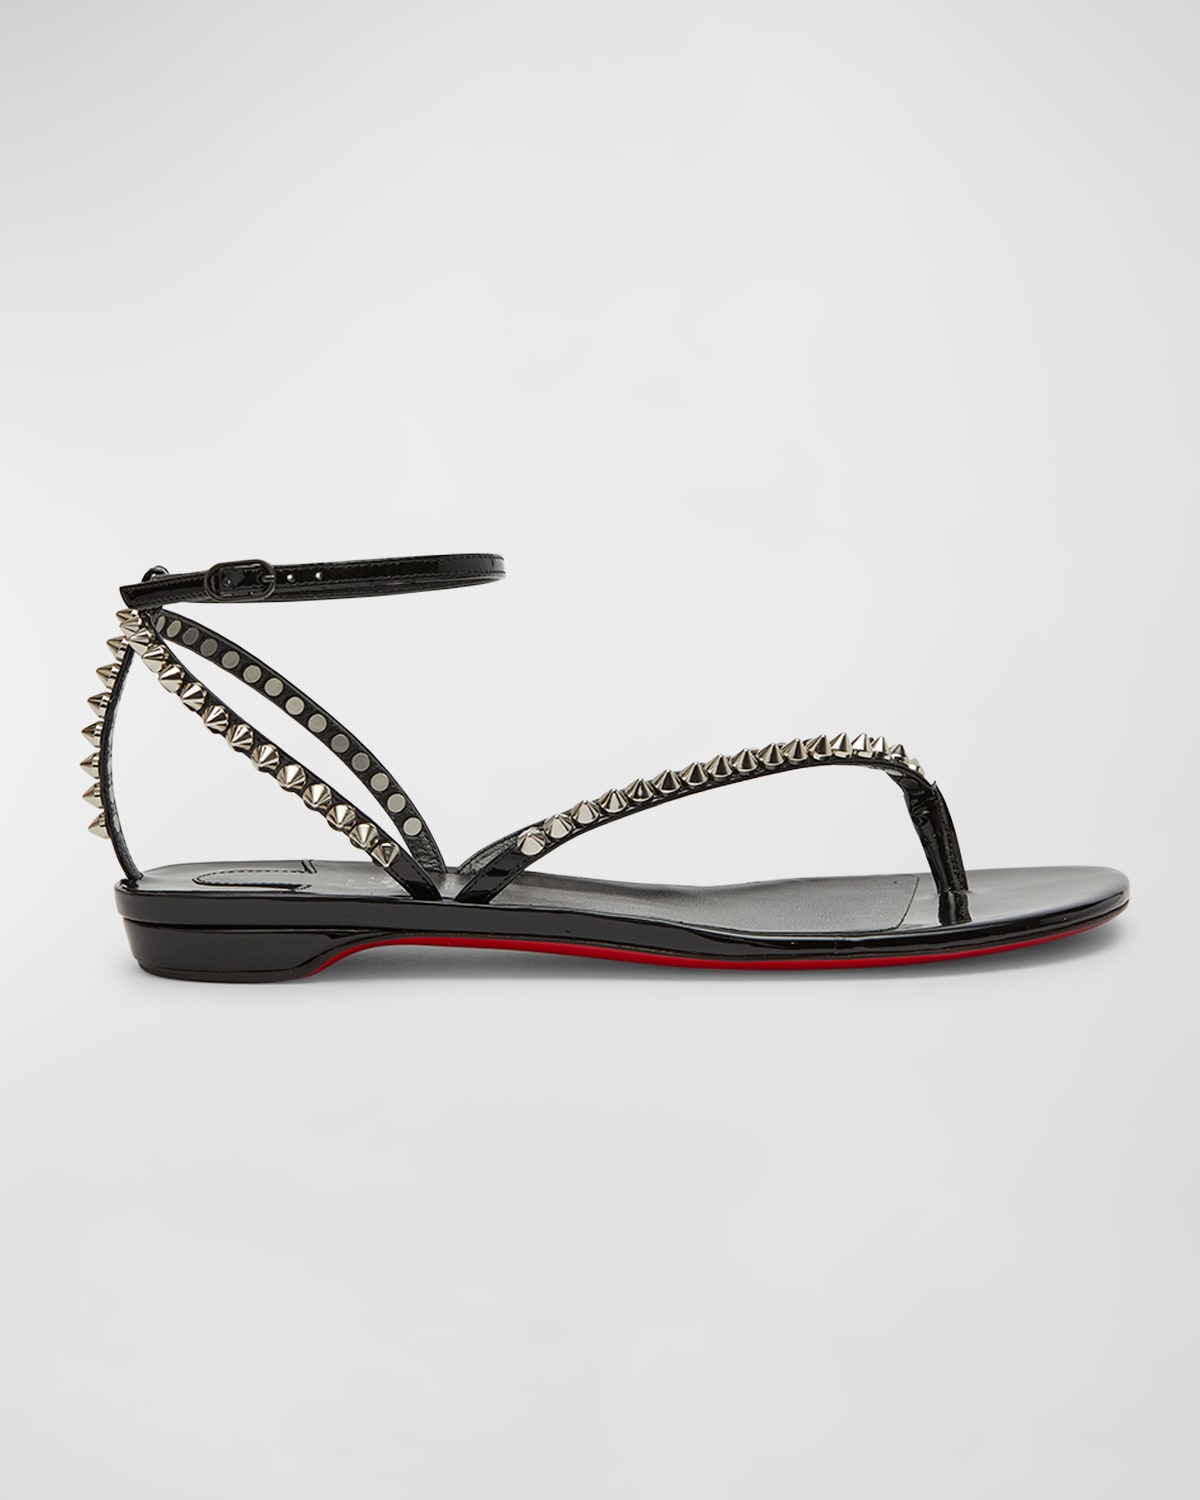 CHRISTIAN LOUBOUTIN SO ME TONGUETTA SPIKE RED SOLE THONG SANDALS